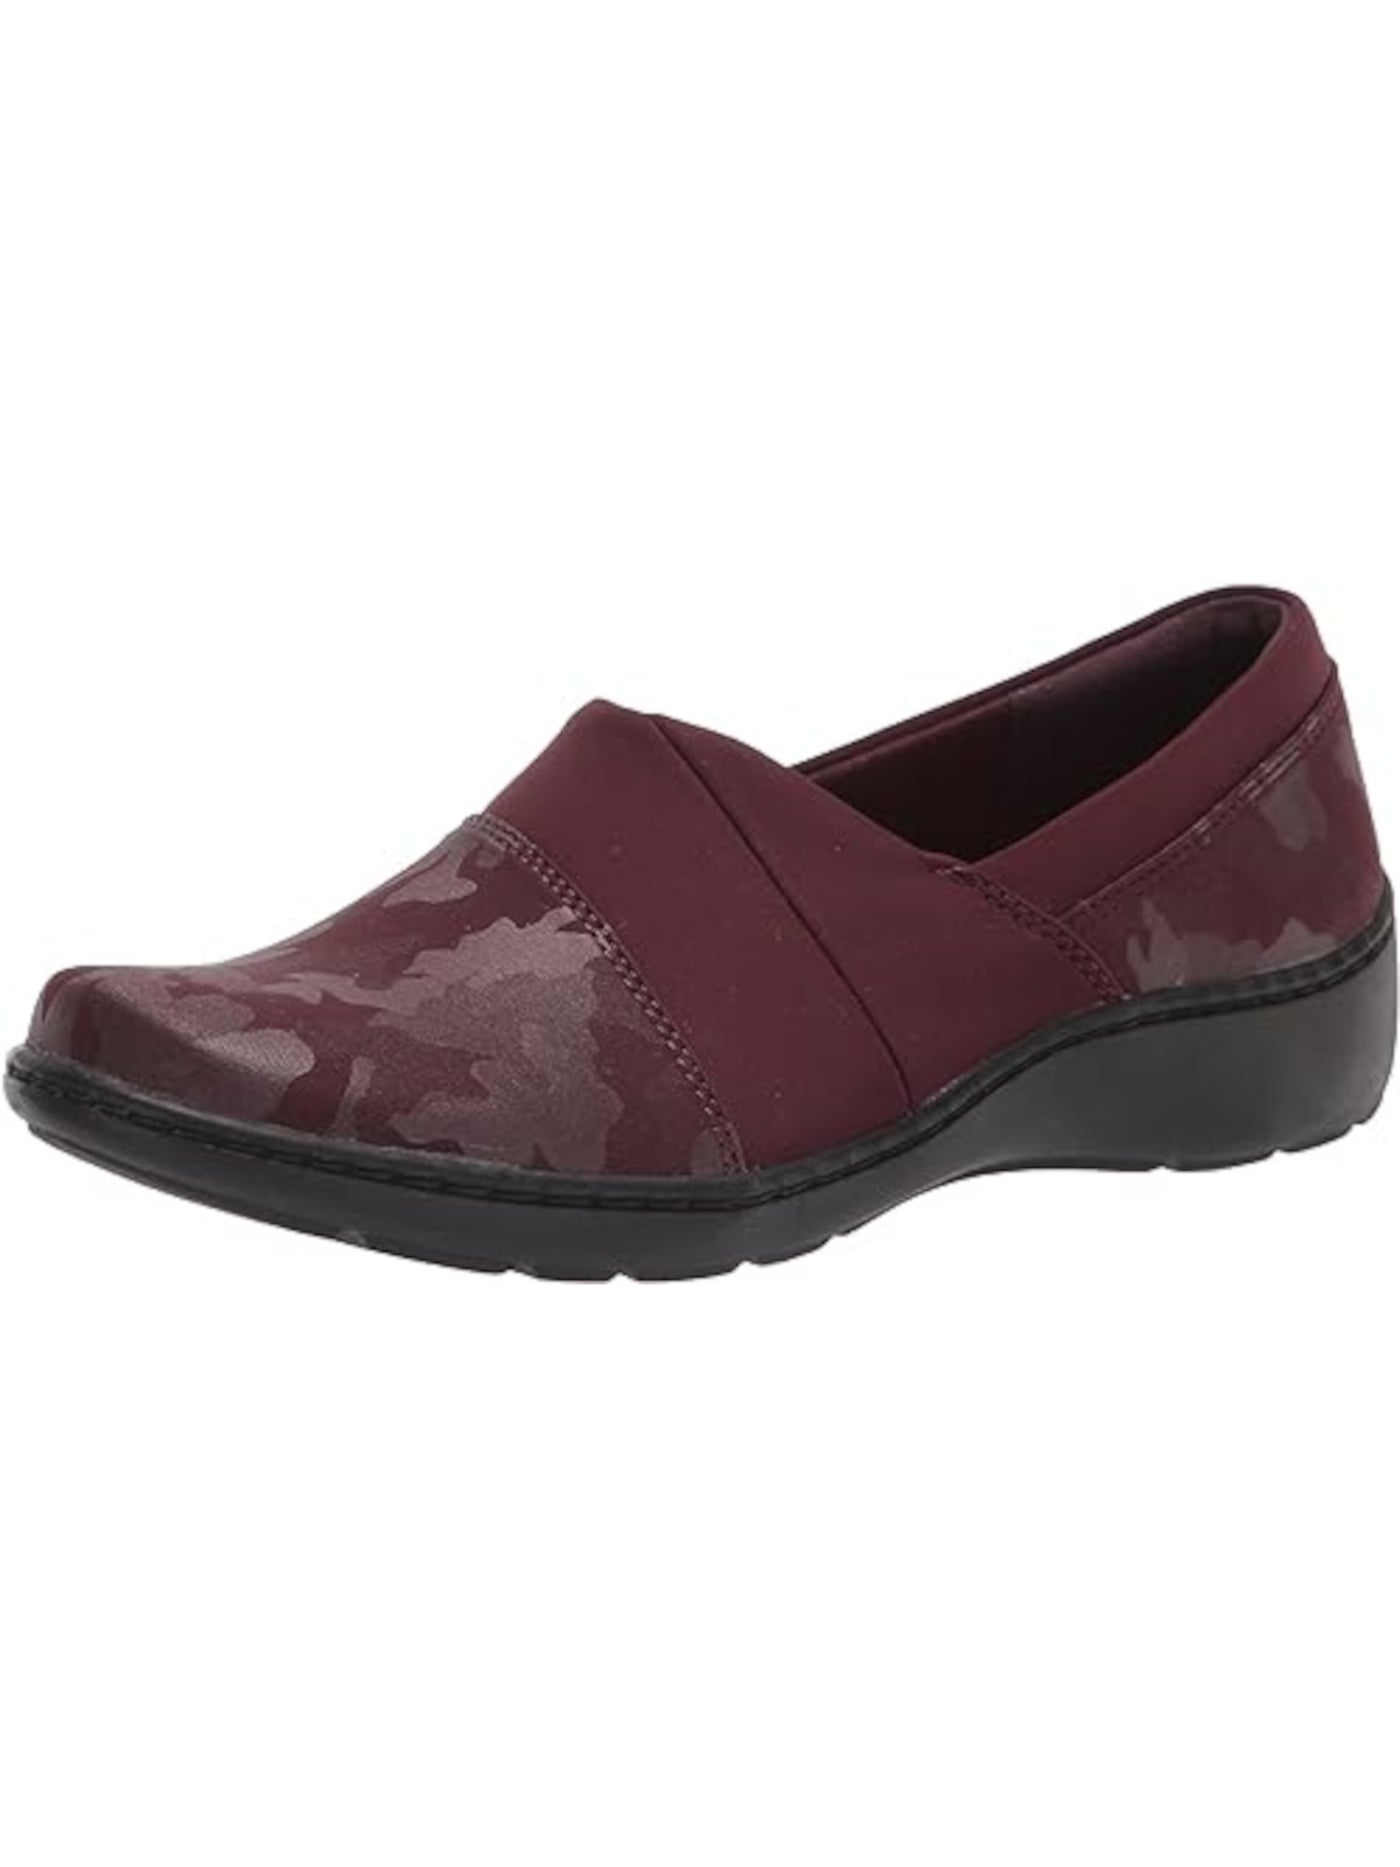 COLLECTION BY CLARKS Womens Maroon Cushioned Cora Round Toe Slip On Flats Shoes 7.5 M